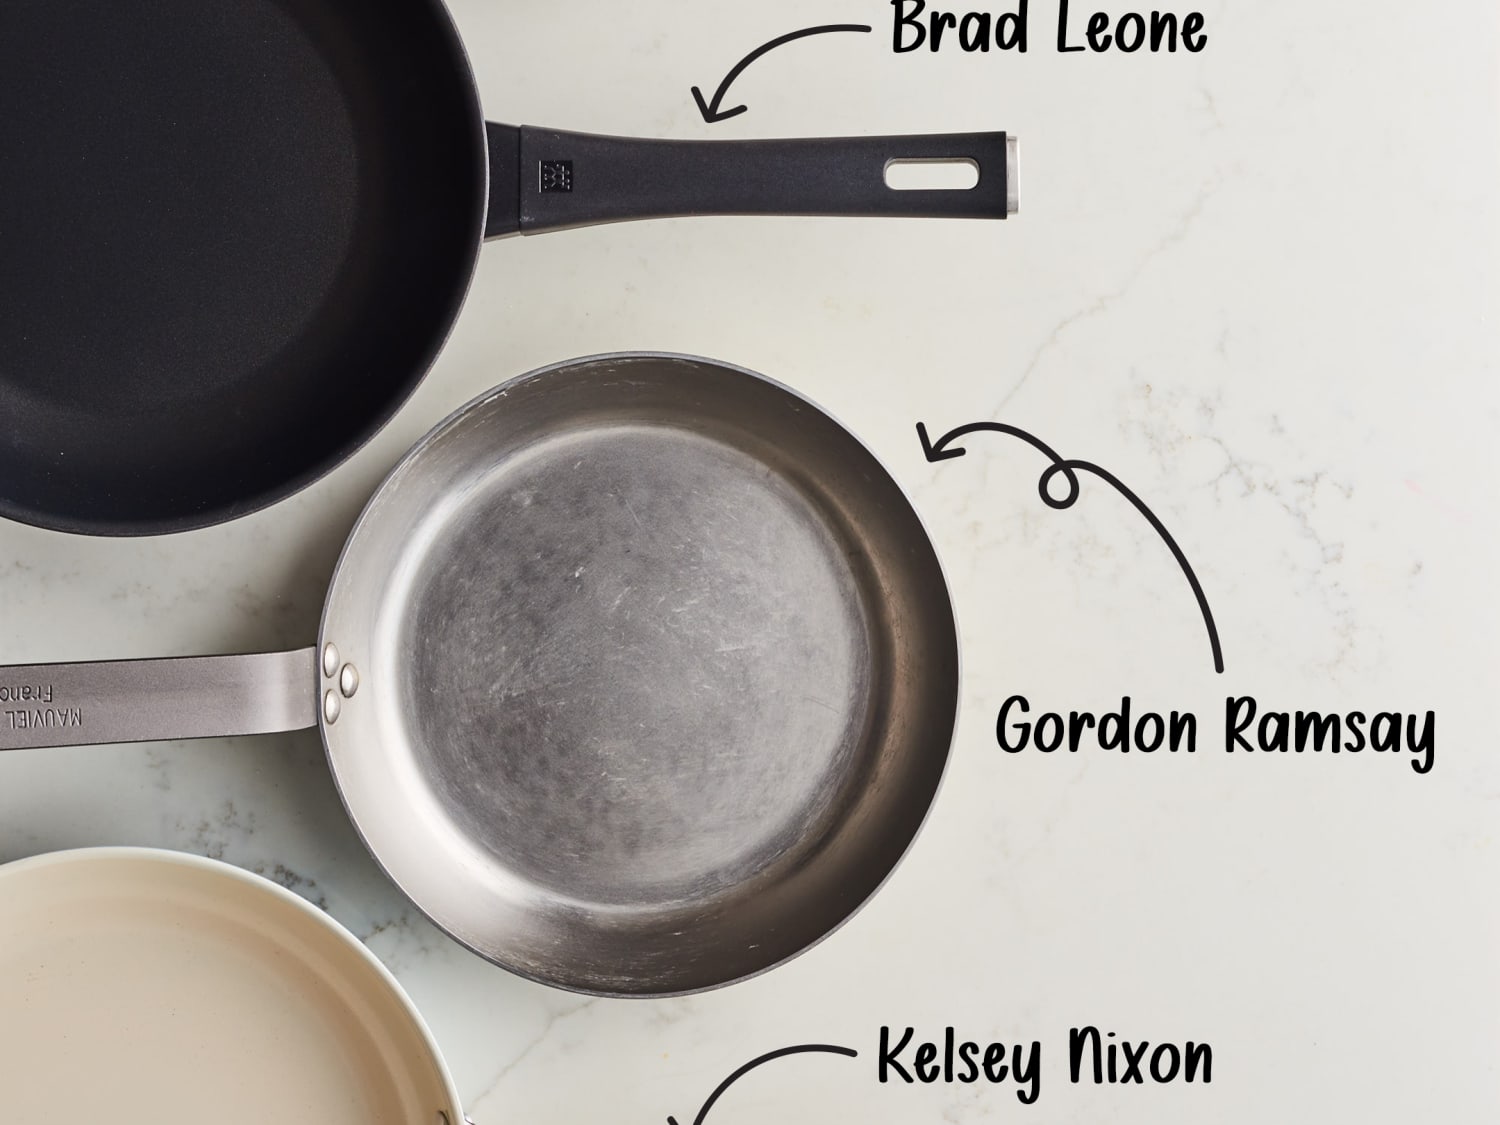 Carbon Steel Pans: 6 Reasons Why Pros Love Them